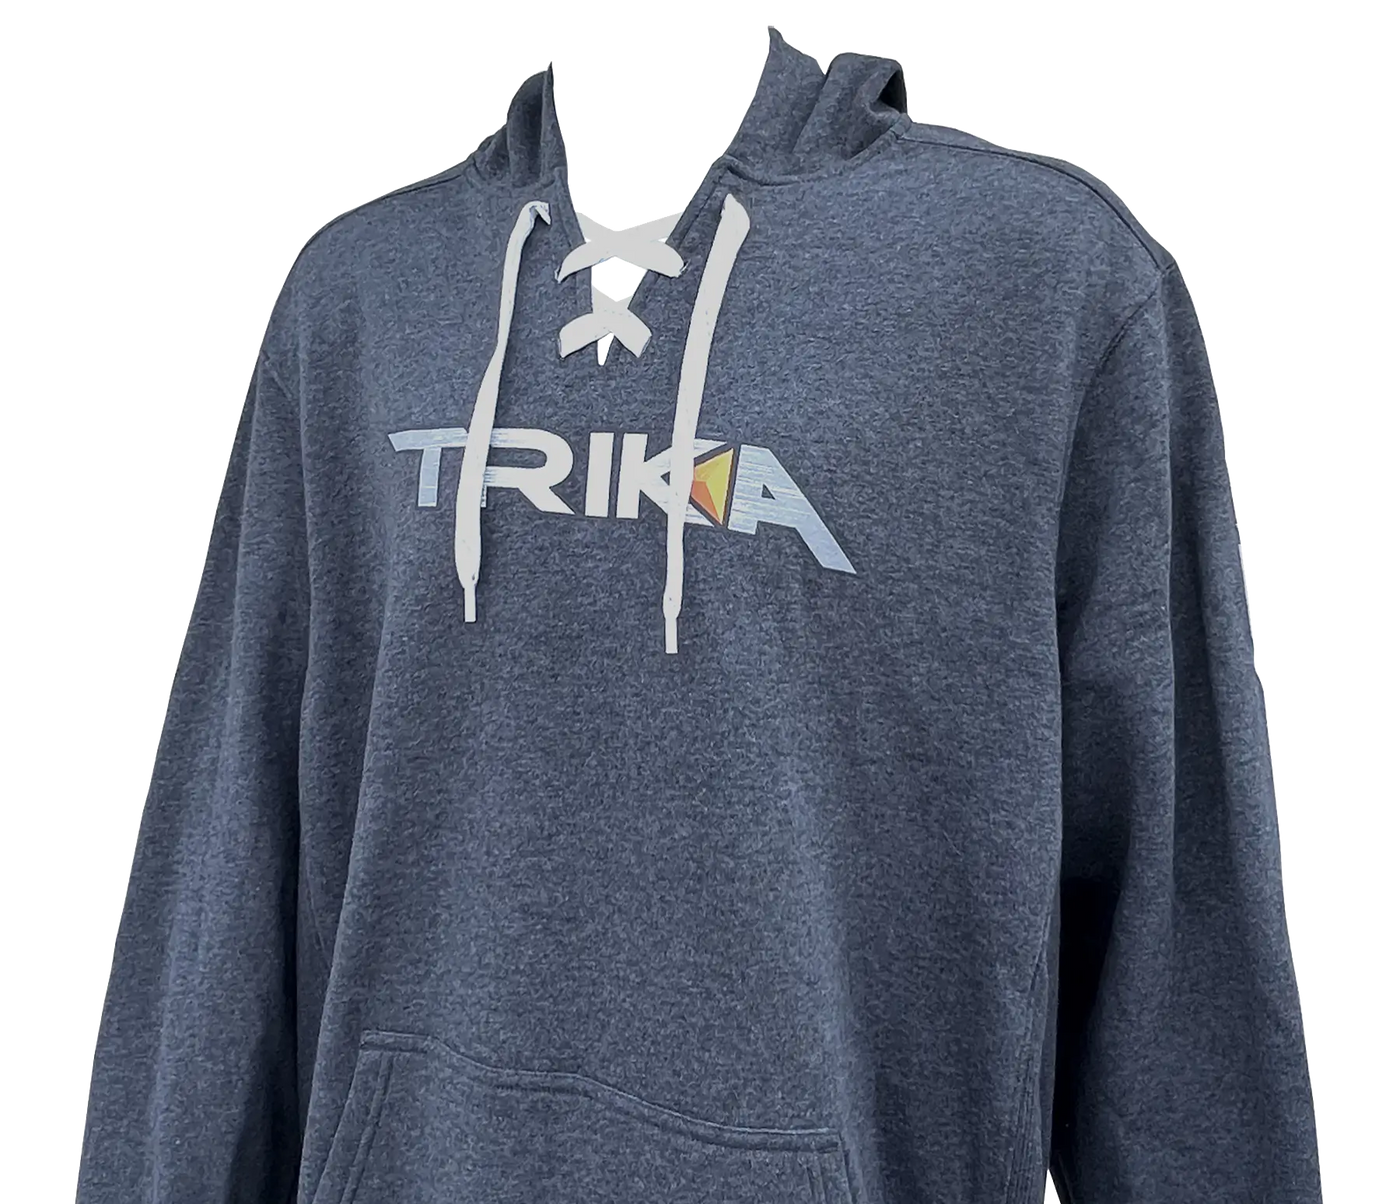 Trika Lace-up Pullover Hoodie